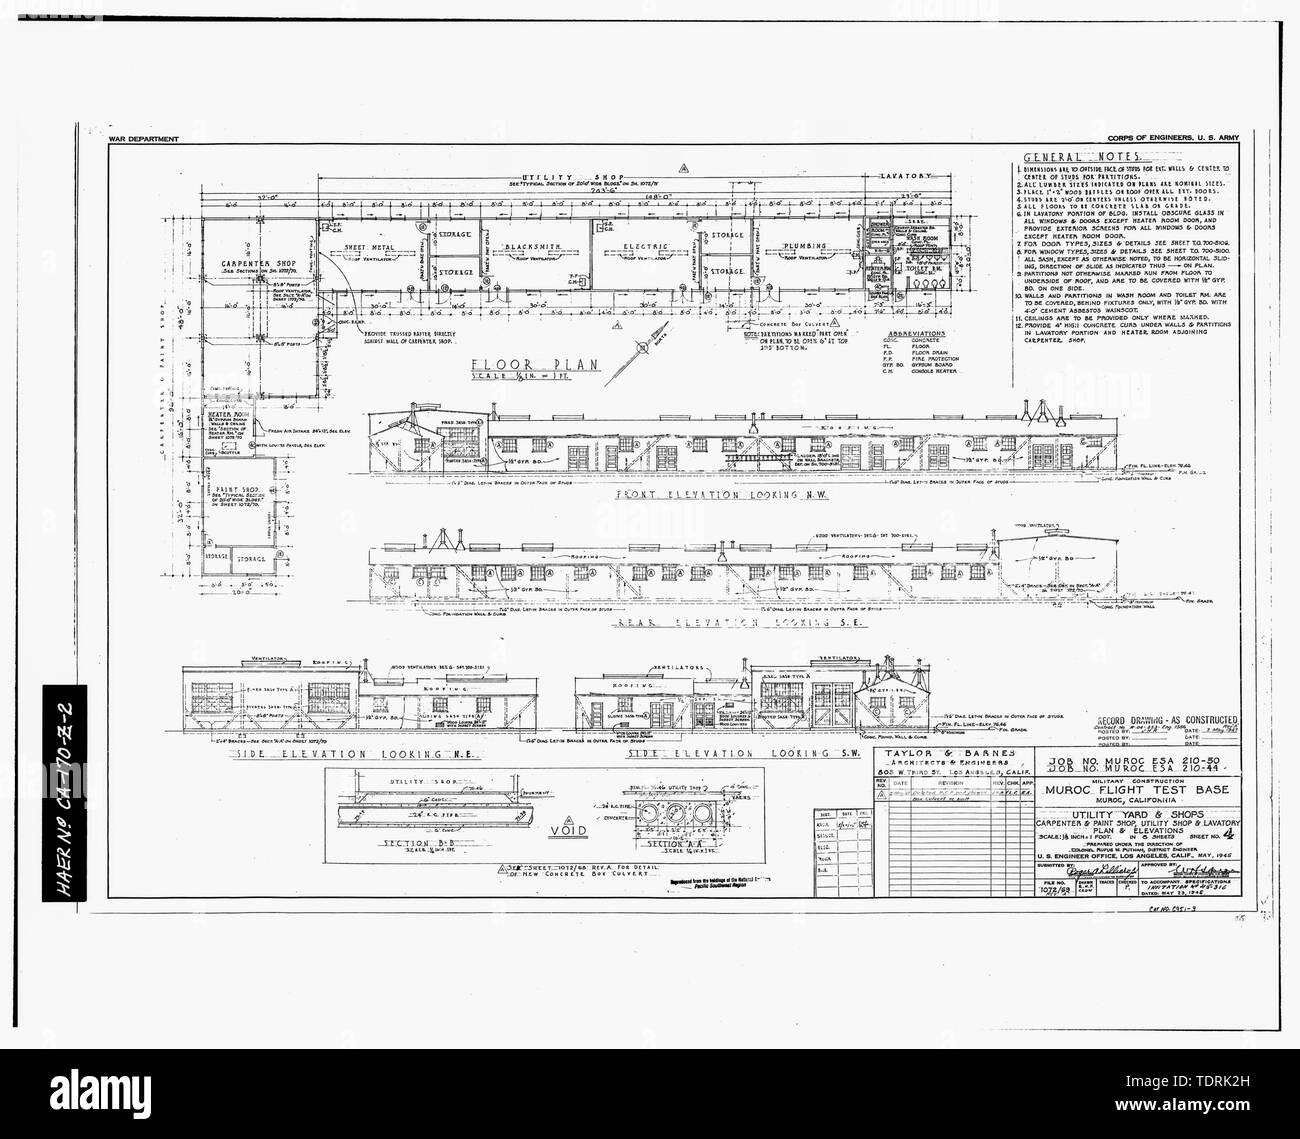 Photographic copy of architectural drawings for Building 4315- Taylor and Barnes, Architects and Engineers, 803 W. Third Street, Los Angeles California), O.C.E. (Office of Civil Engineer) Job No. Muroc ESA 210-50 and 210-44, Military Construction- Muroc Flight Test Base, Muroc, California, Utility Yard and Shops- Carpenter and Paint Shop, Utility Shop and Lavatory, Plan and Elevations, Sheet No. 4 of 8, May 1945. Reproduced from the holdings of the National Archives, Pacific Southwest Region;  - Edwards Air Force Base, North Base, Utility and Paint Shop, Second and E Streets, Boron, Kern Count Stock Photo